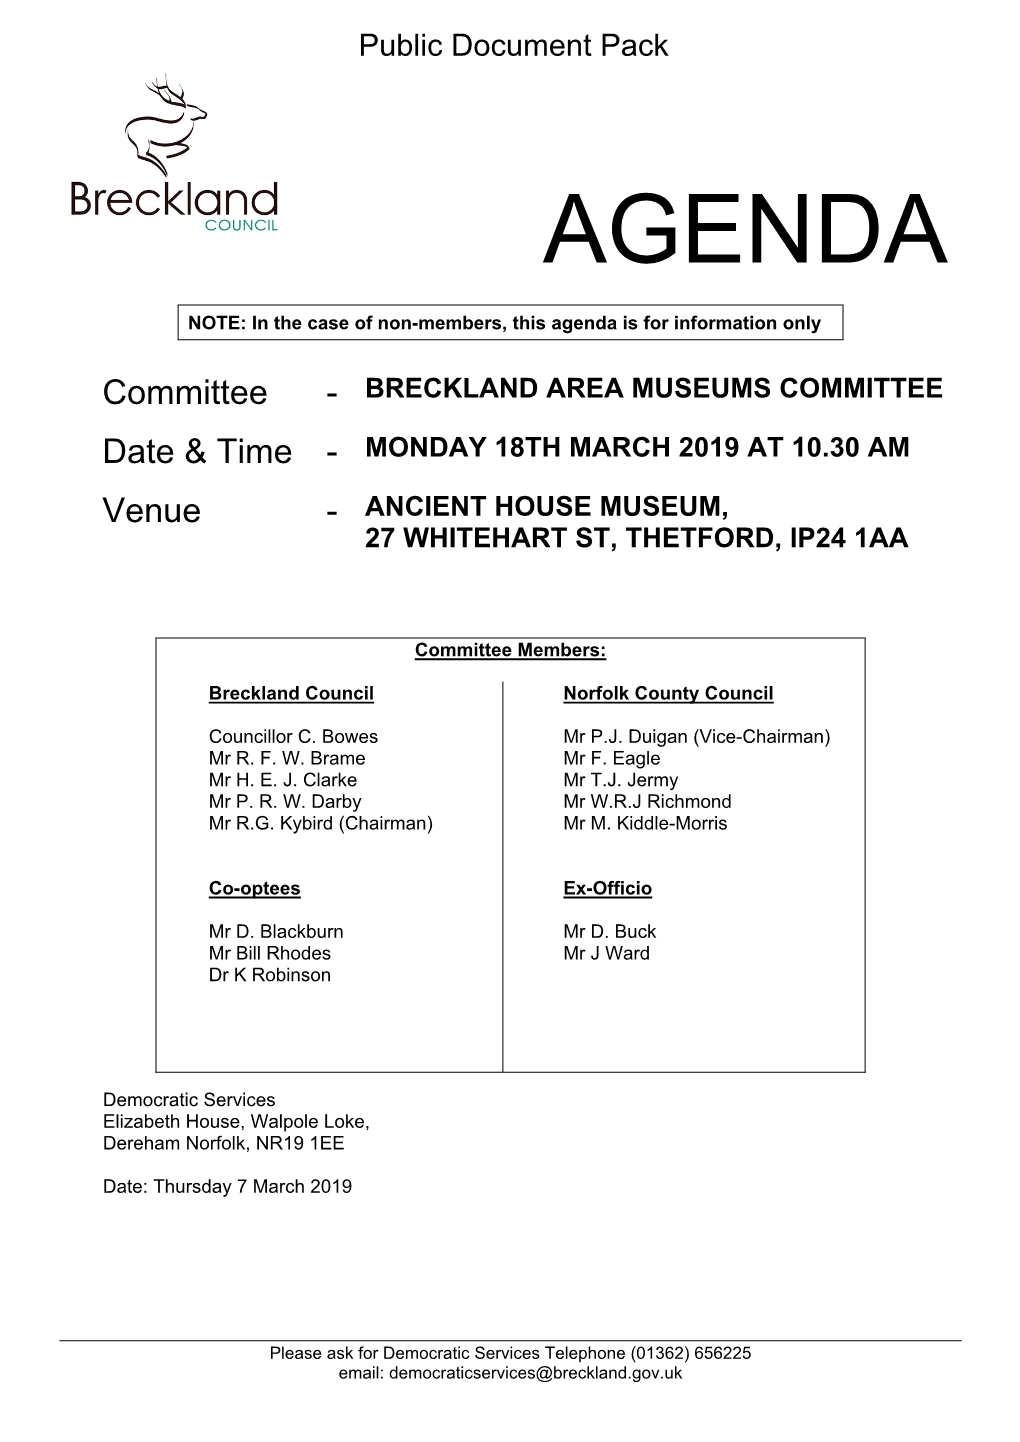 (Public Pack)Agenda Document for Breckland Area Museums Committee, 18/03/2019 10:30